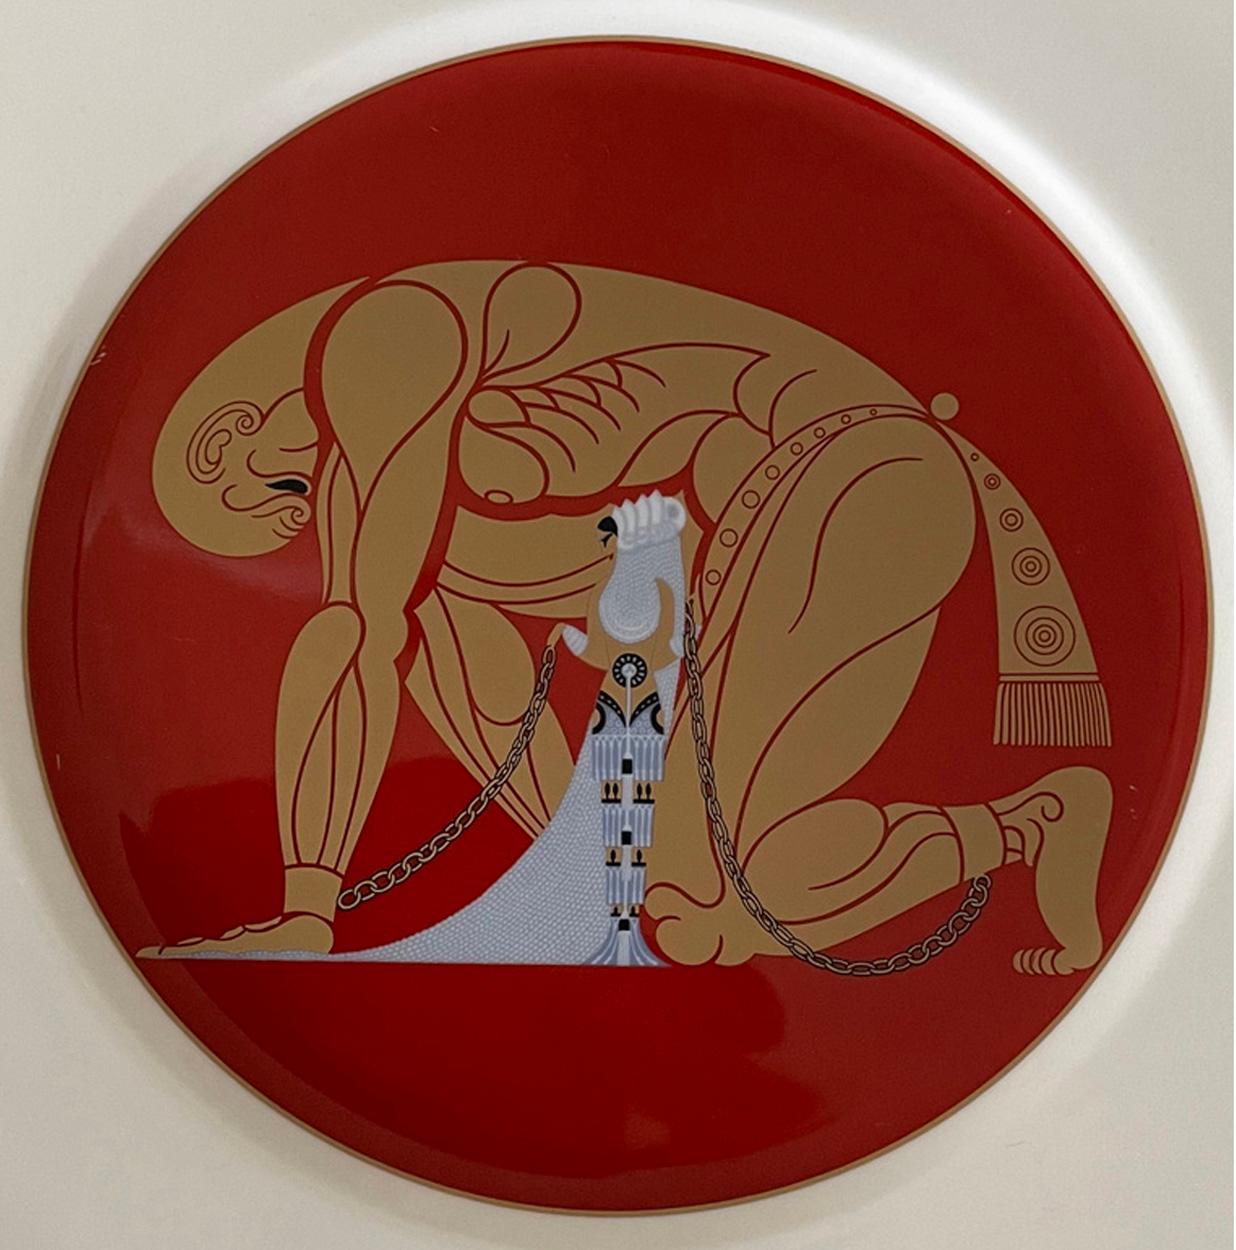 Samson & Delilah Plate, Bone China, Erte (after), 1987 In Good Condition For Sale In Melbourne, Victoria